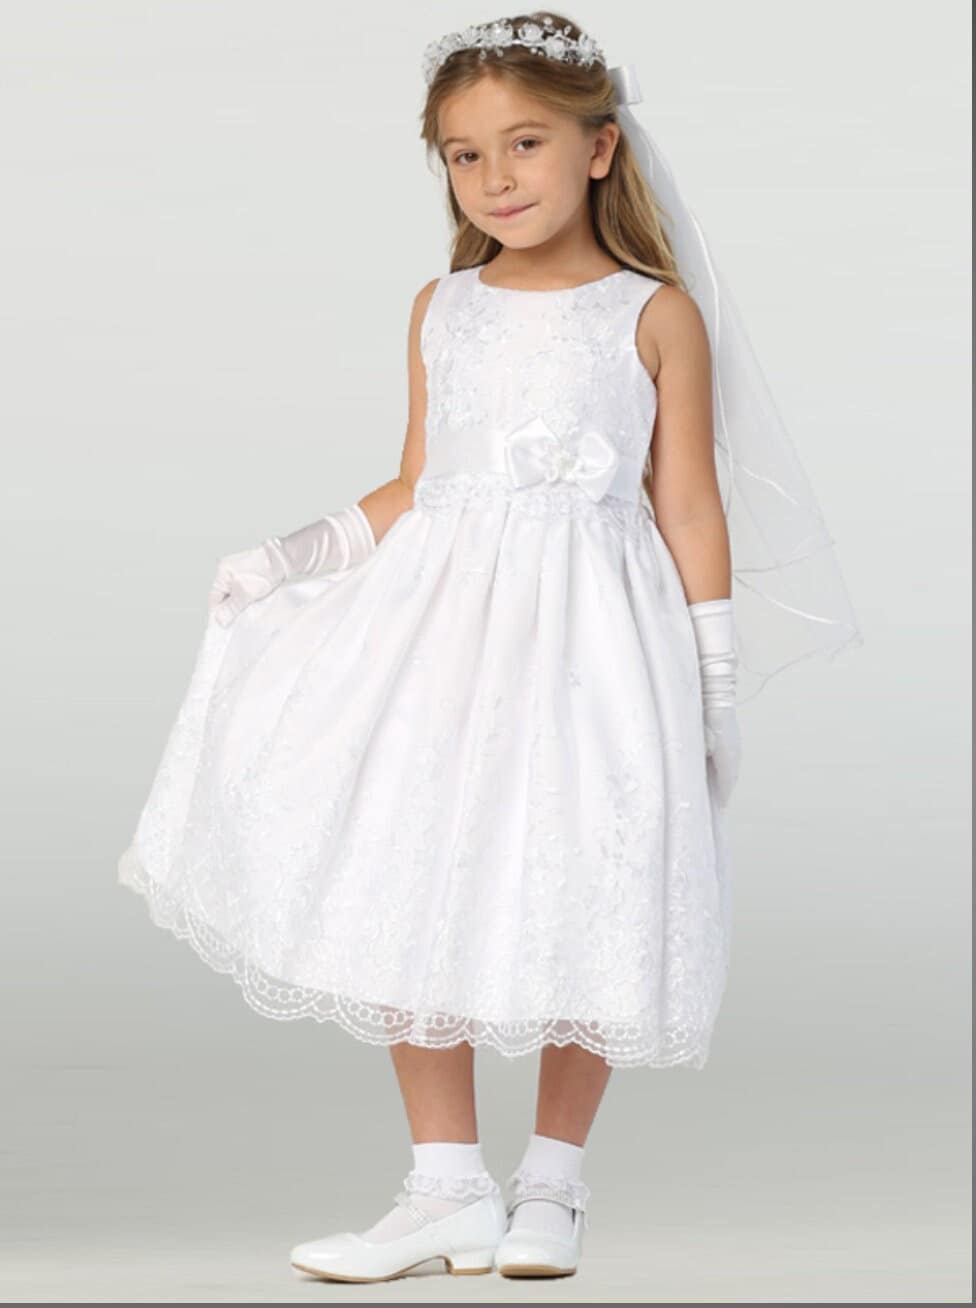 A girl wearing a beautiful white First Communion Dress with embroidered organza and satin ribbon trim.